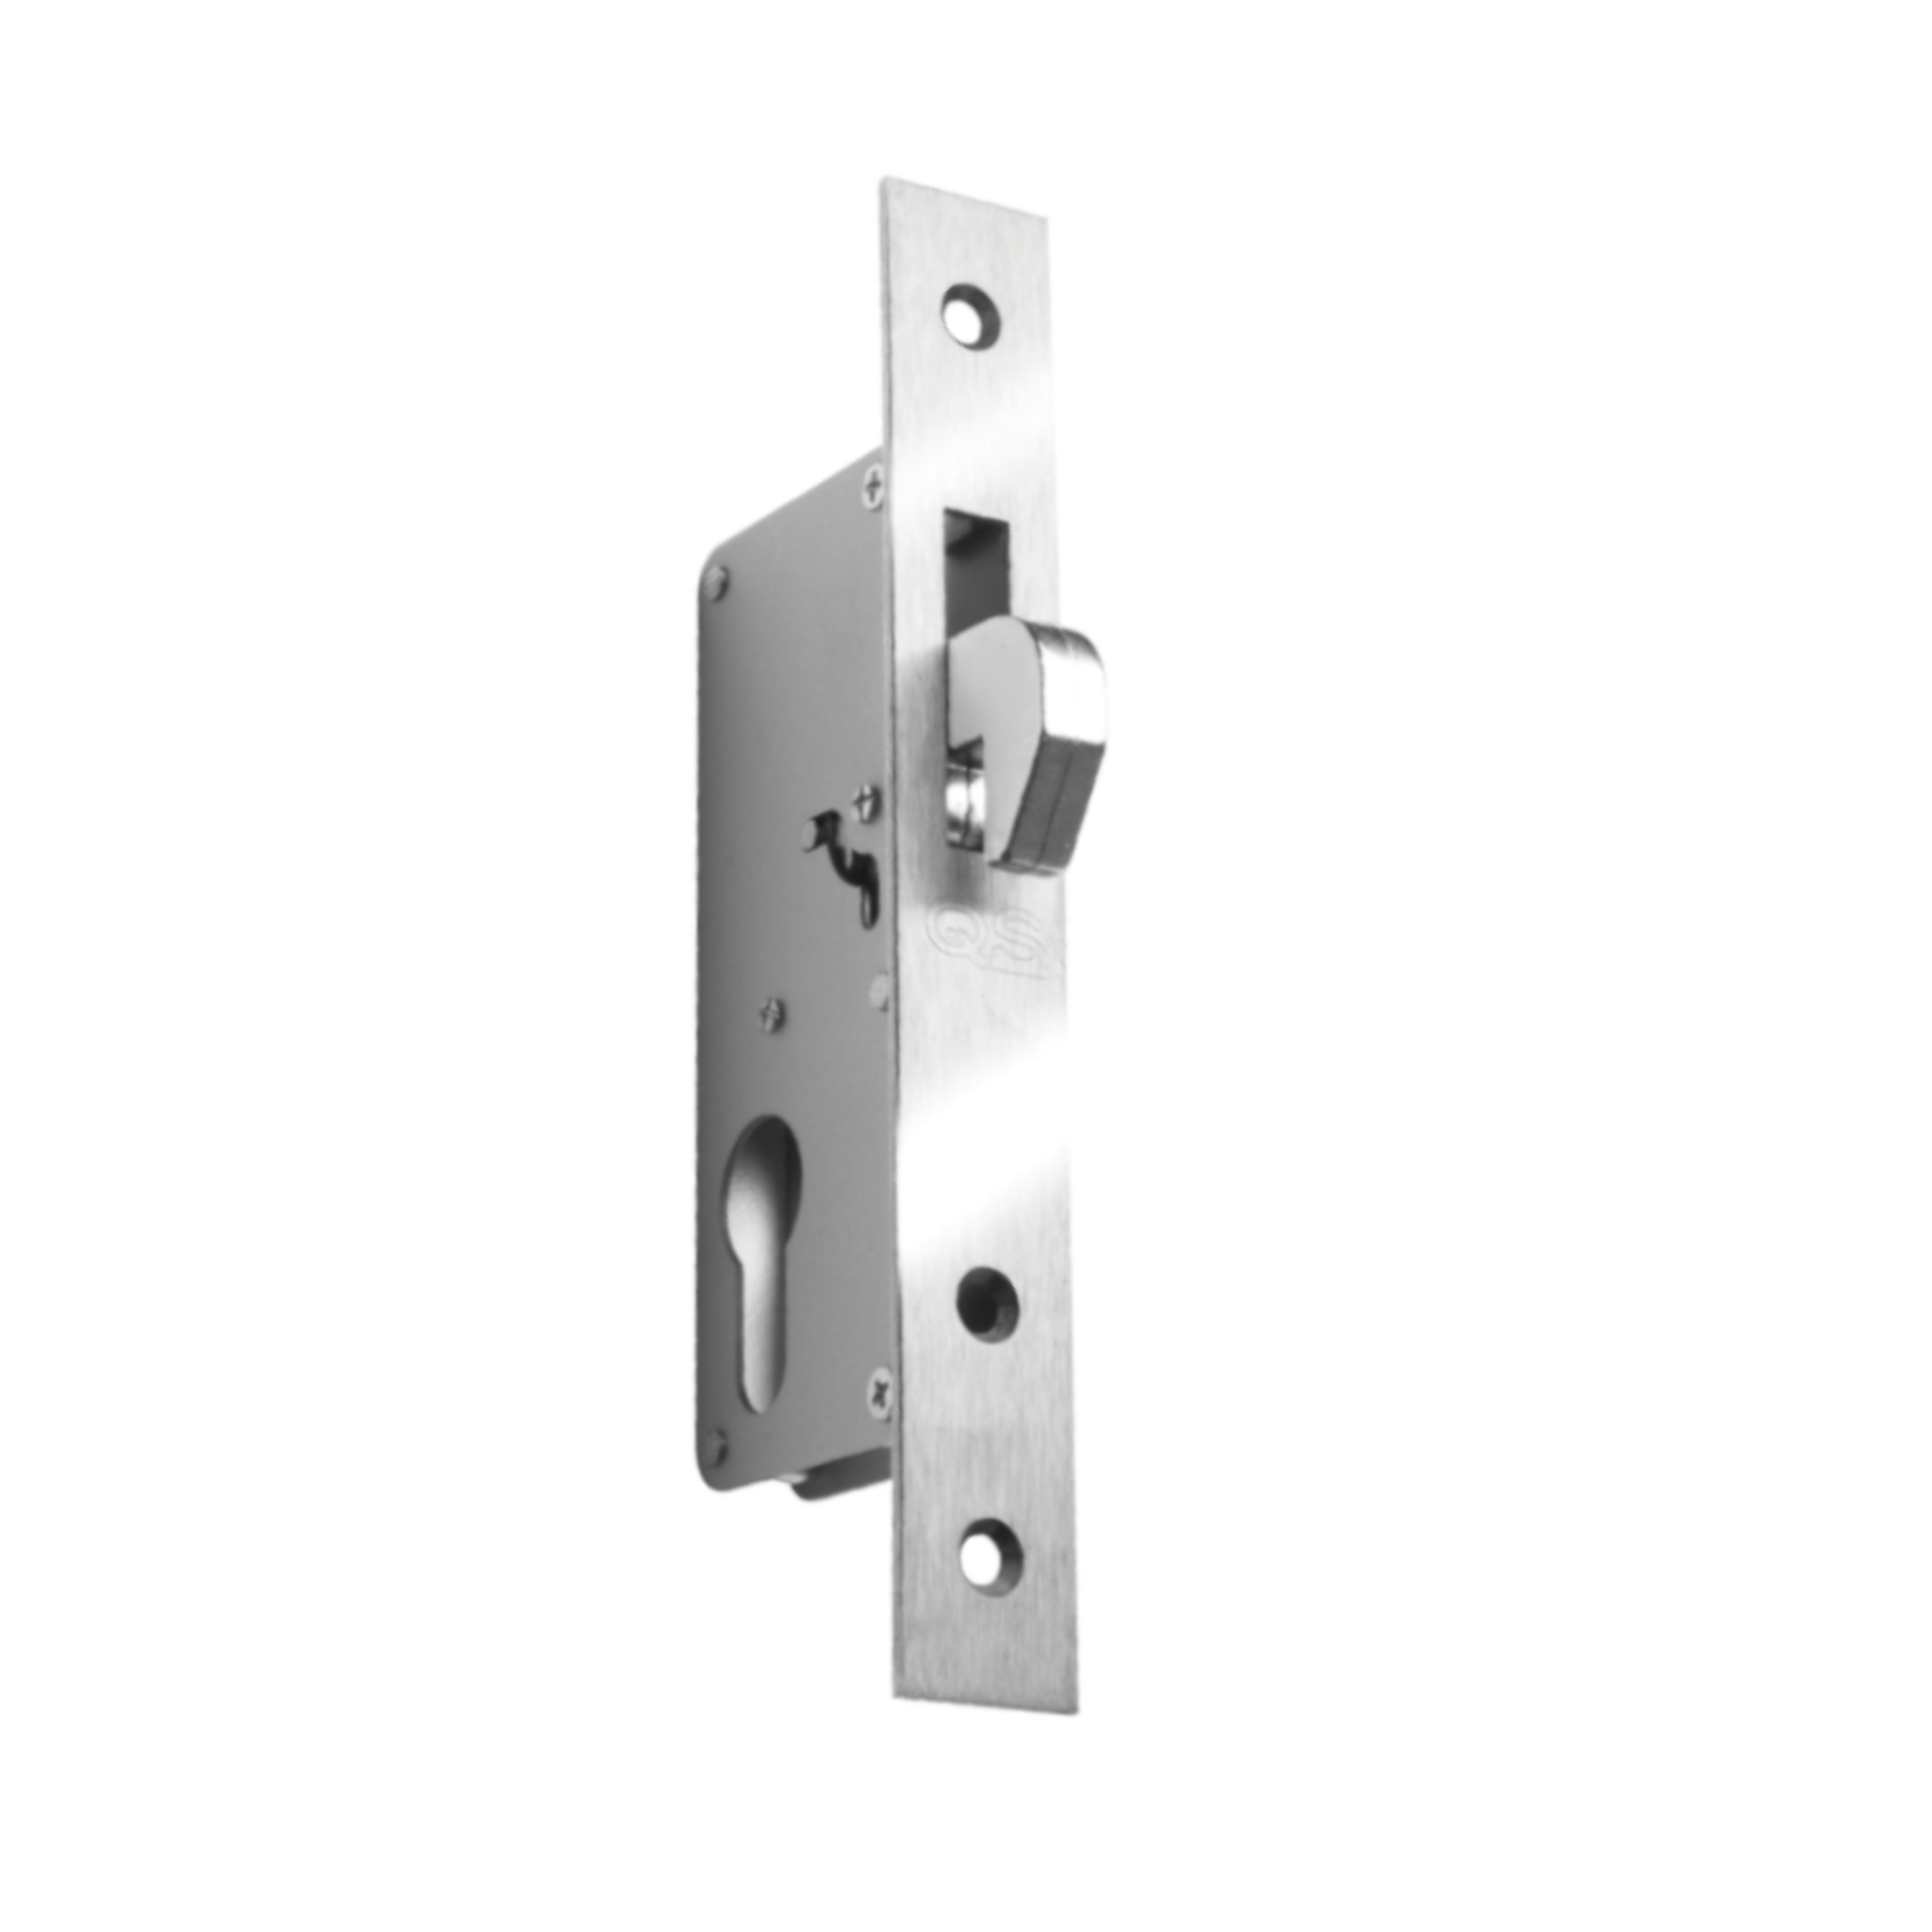 QS6225SS, Hook Lock, Euro Cylinder, Excluding Cylinder, 25mm (Backset), 62mm (ctc), Stainless Steel, QS